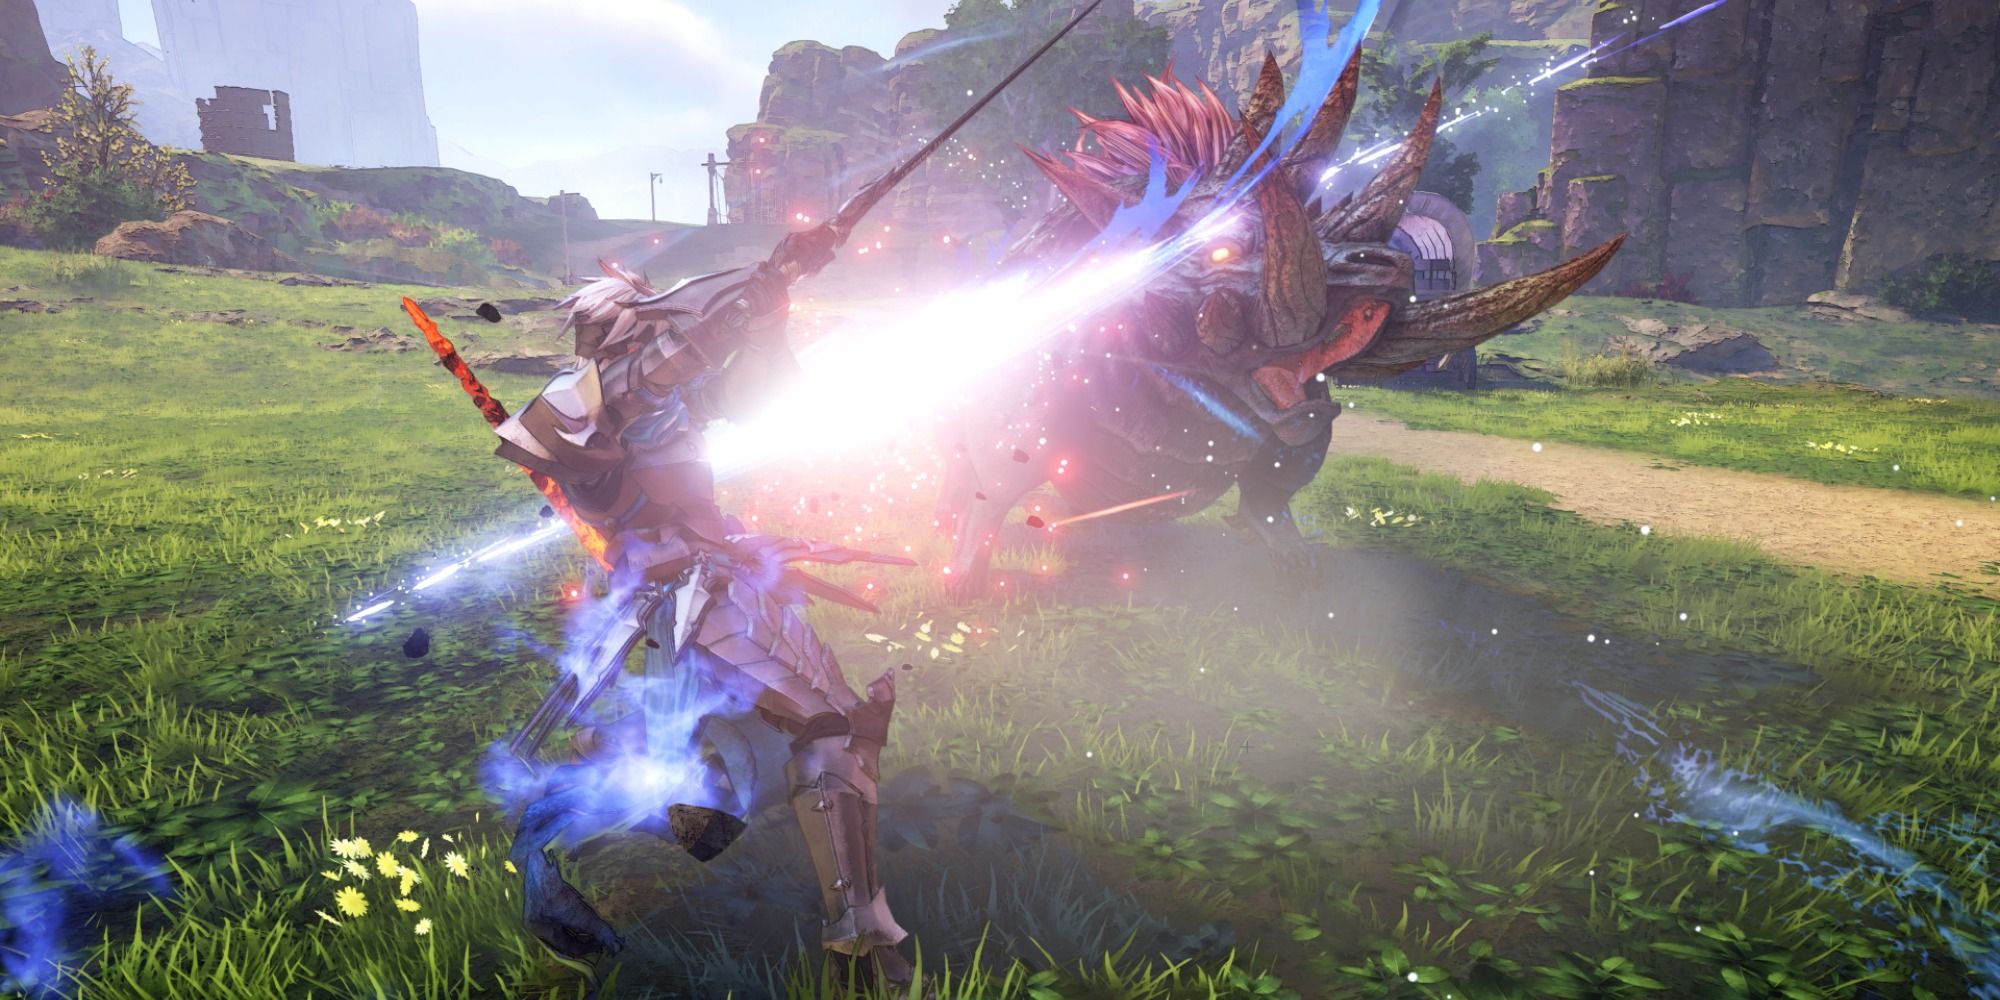 Alphen striking a Boar with his sword in Tales of Arise